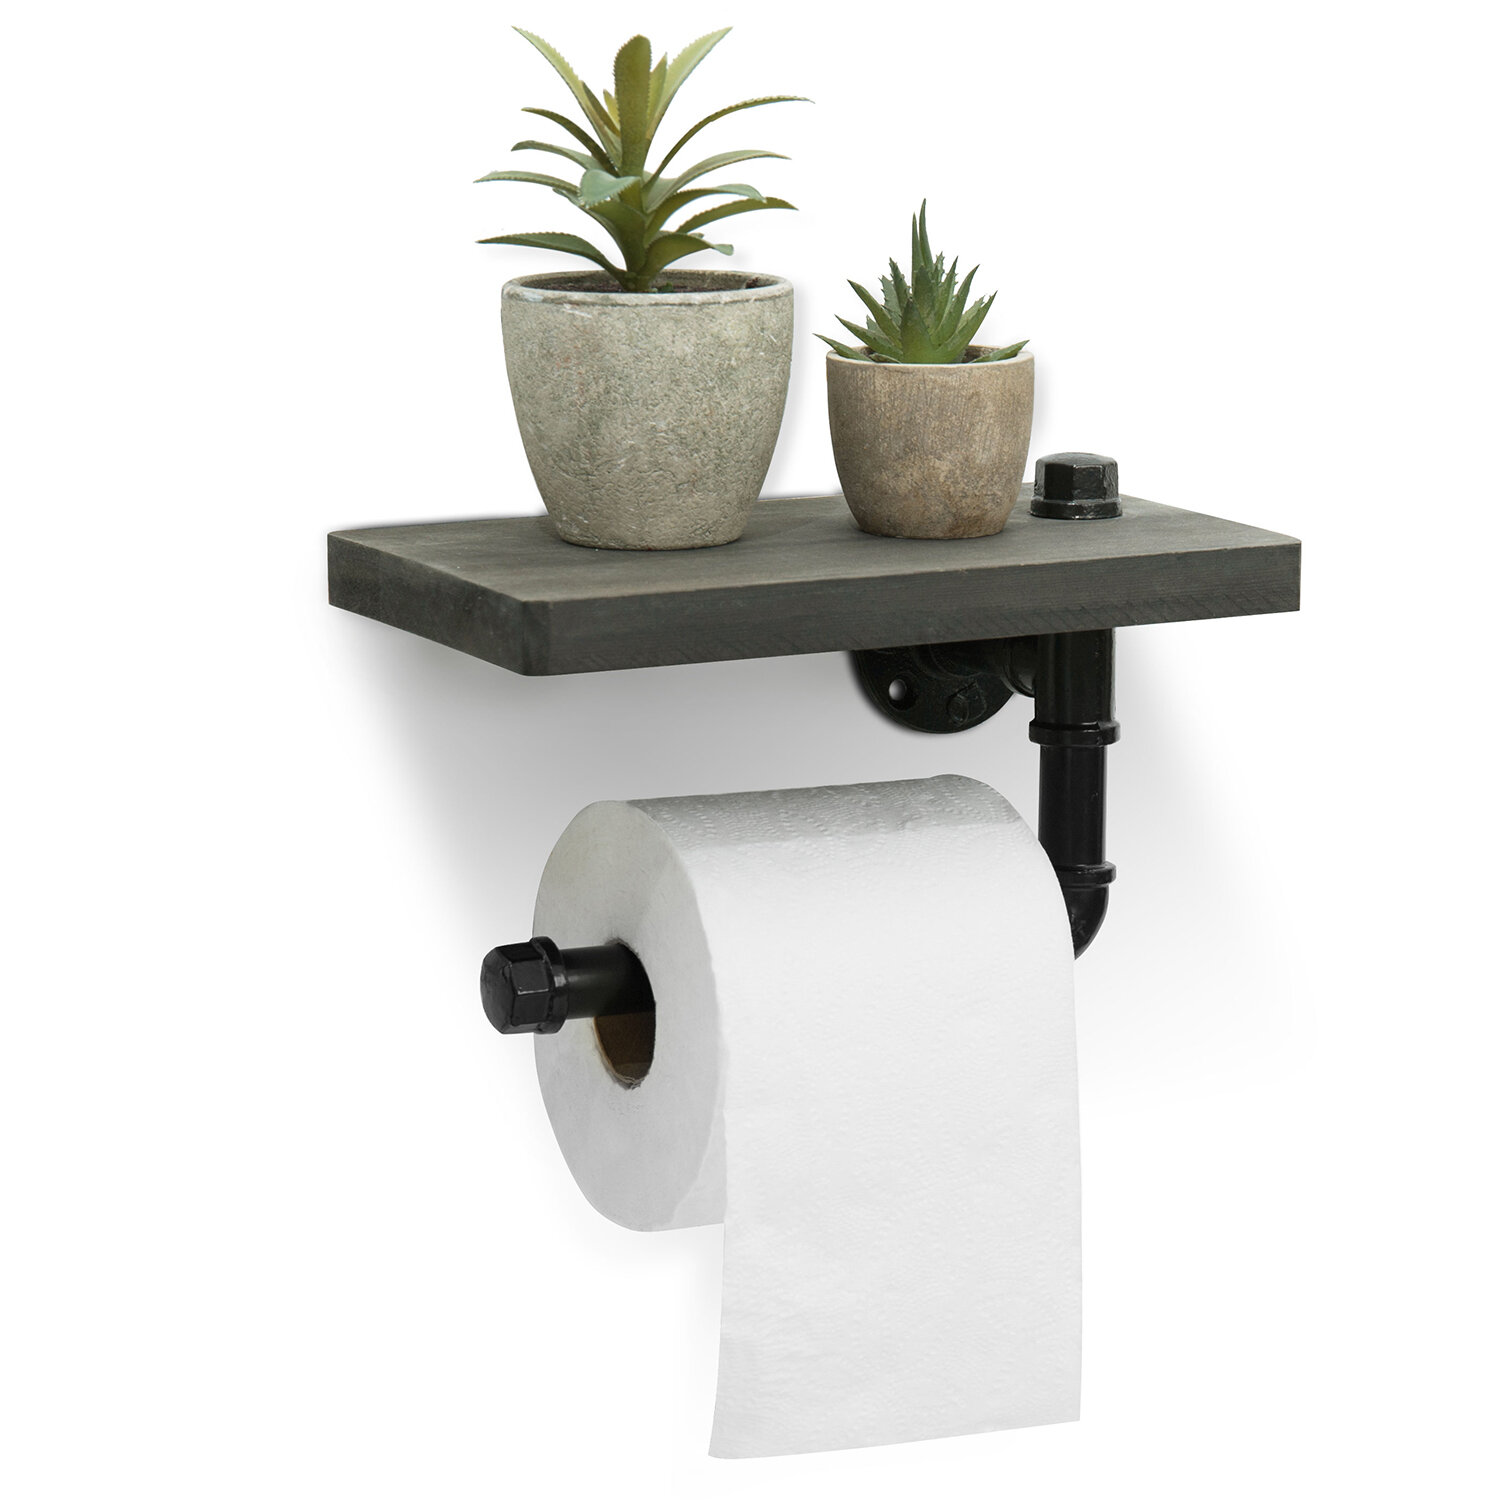 Toilet Paper Holder with Shelf - Wall Mount Bathroom Paper Roll